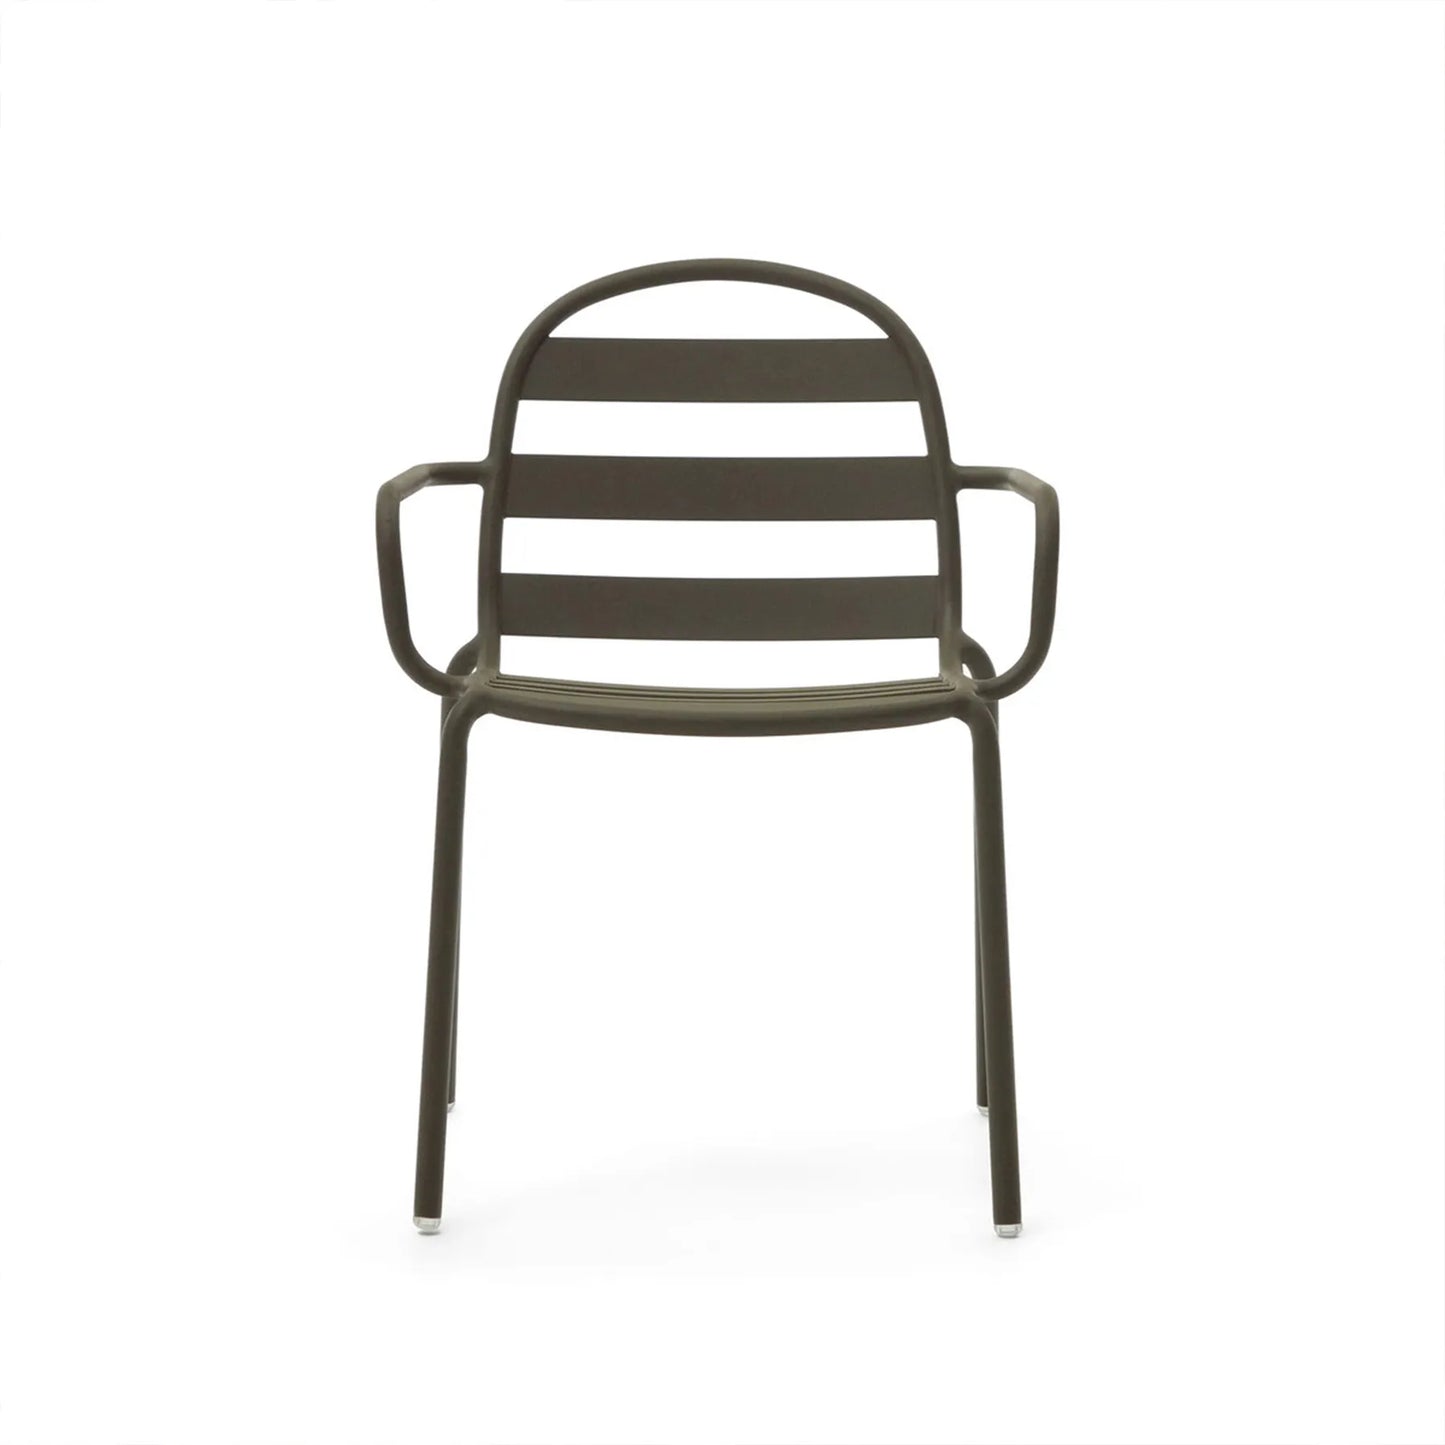 Joncols Outdoor Dining Chair - Green